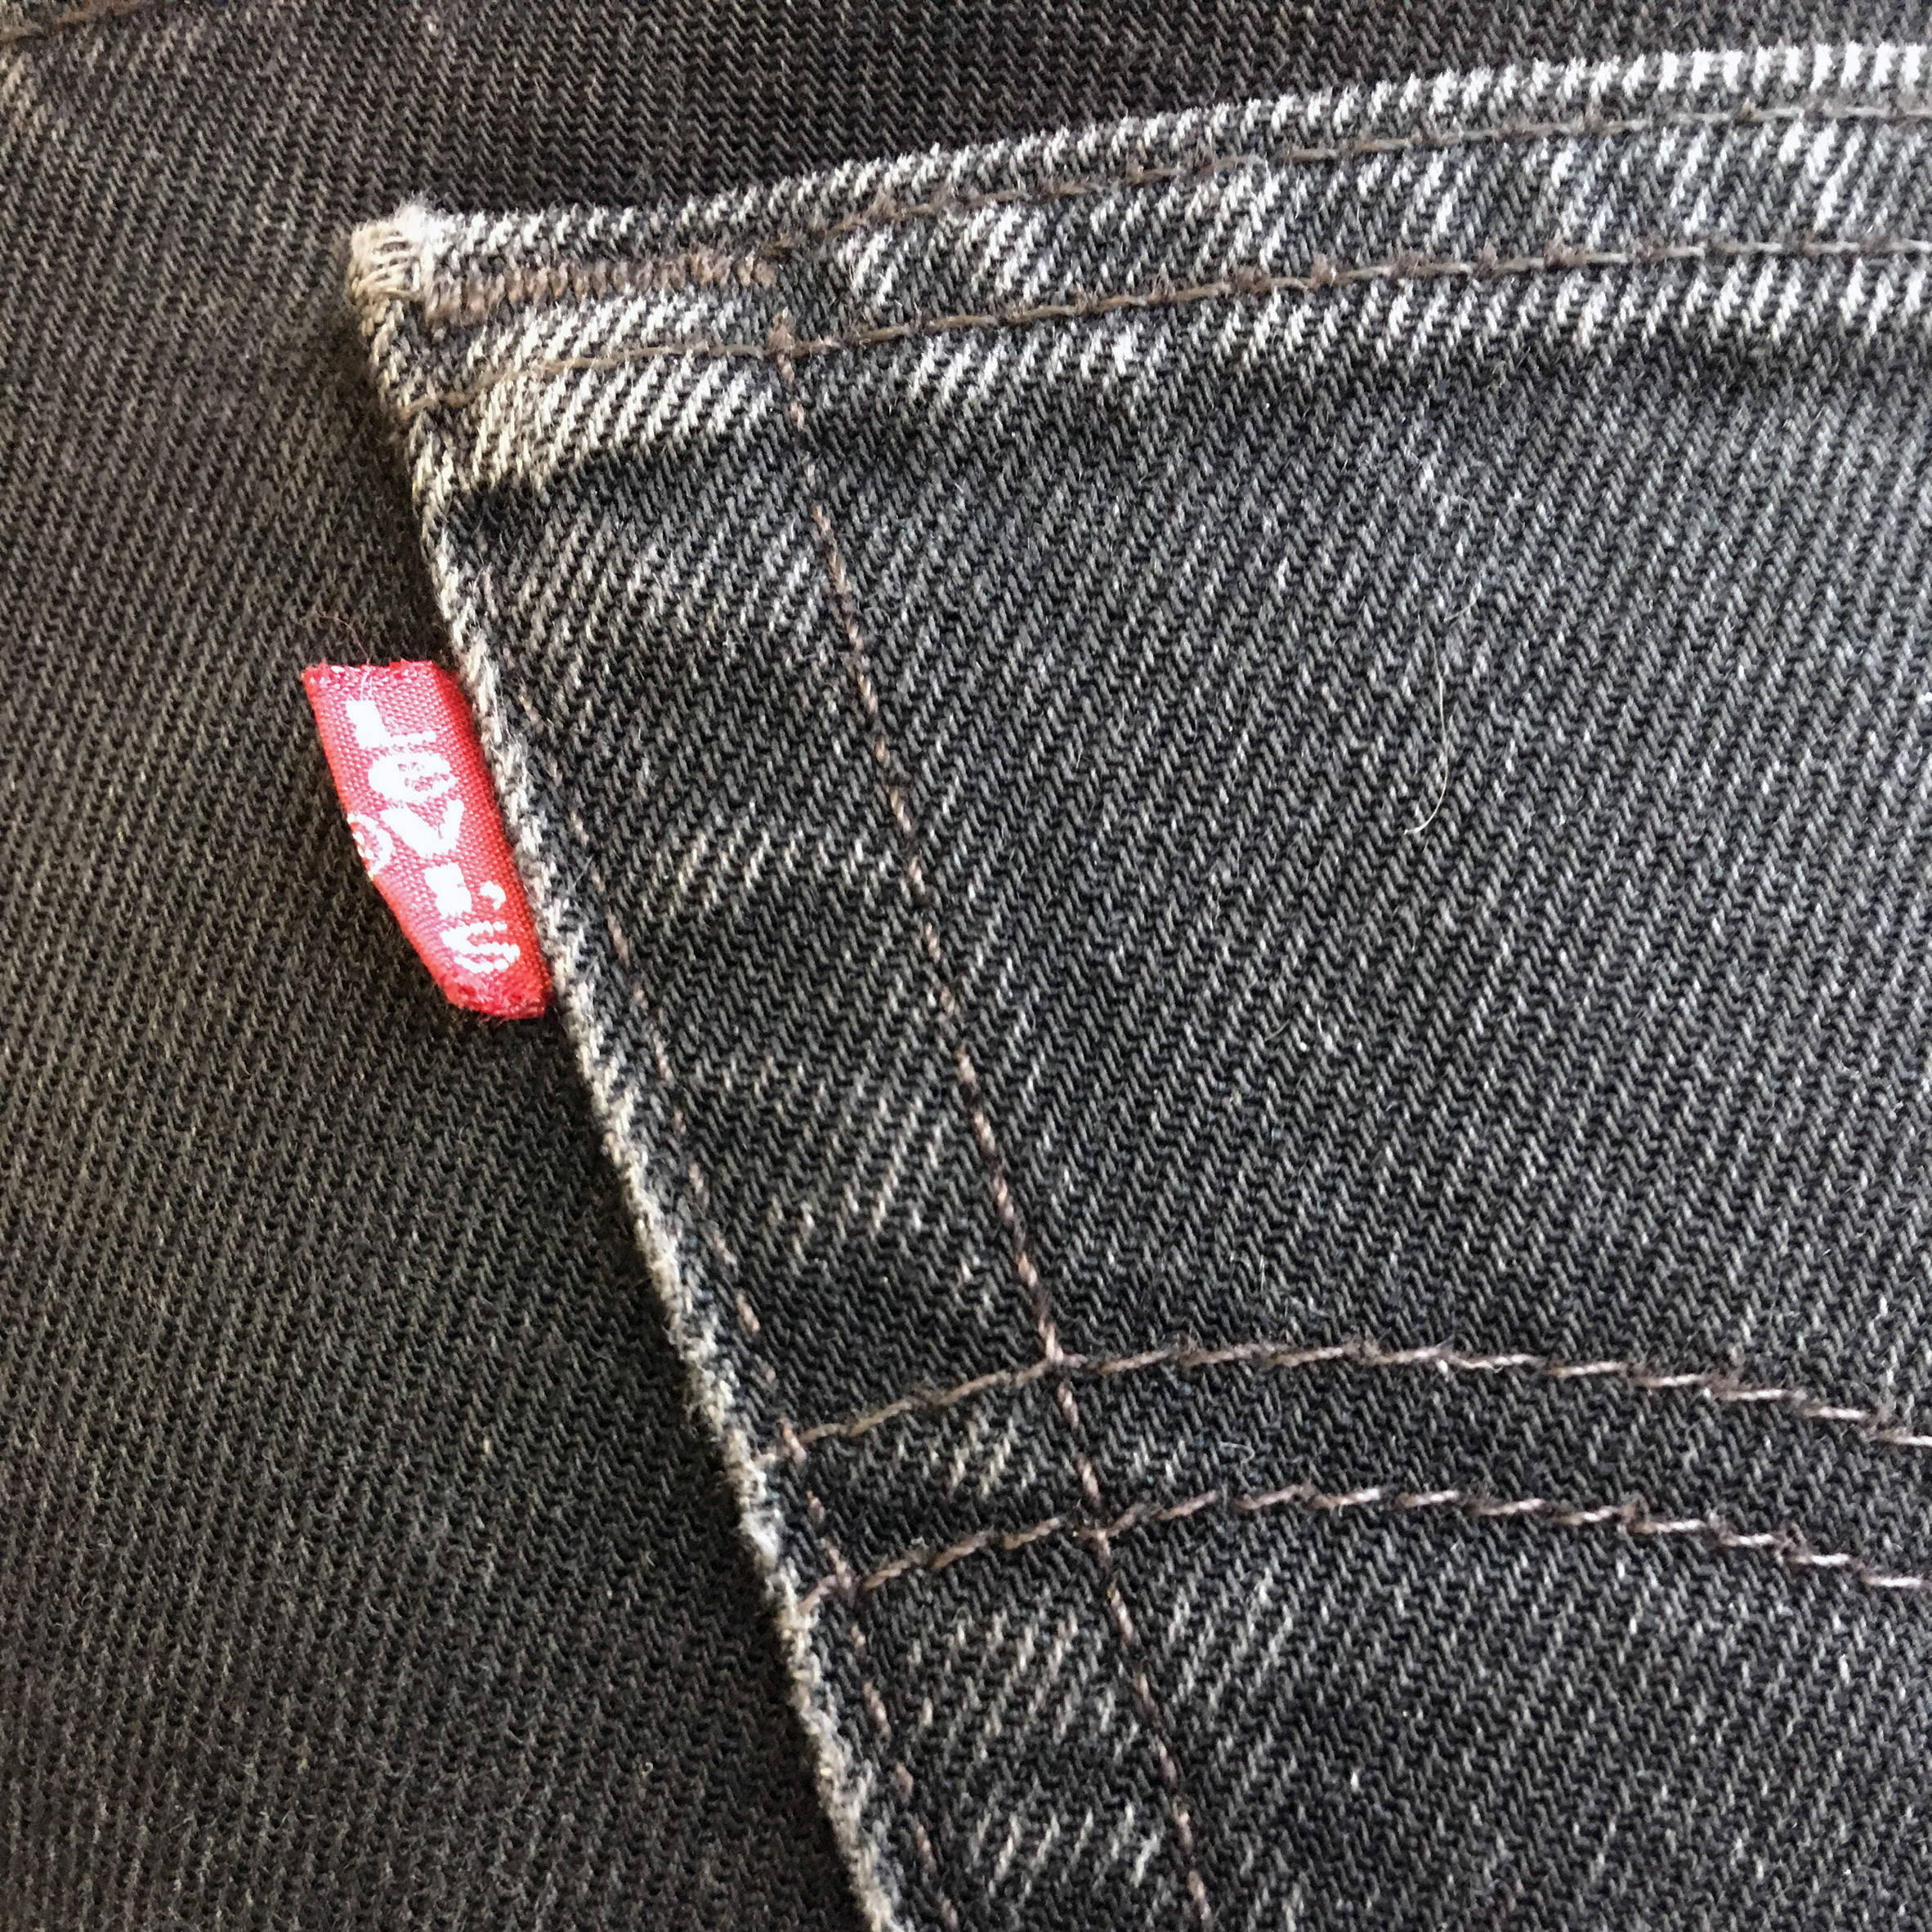 Levi's sues Kenzo for trademark infringement over use of red pocket tab